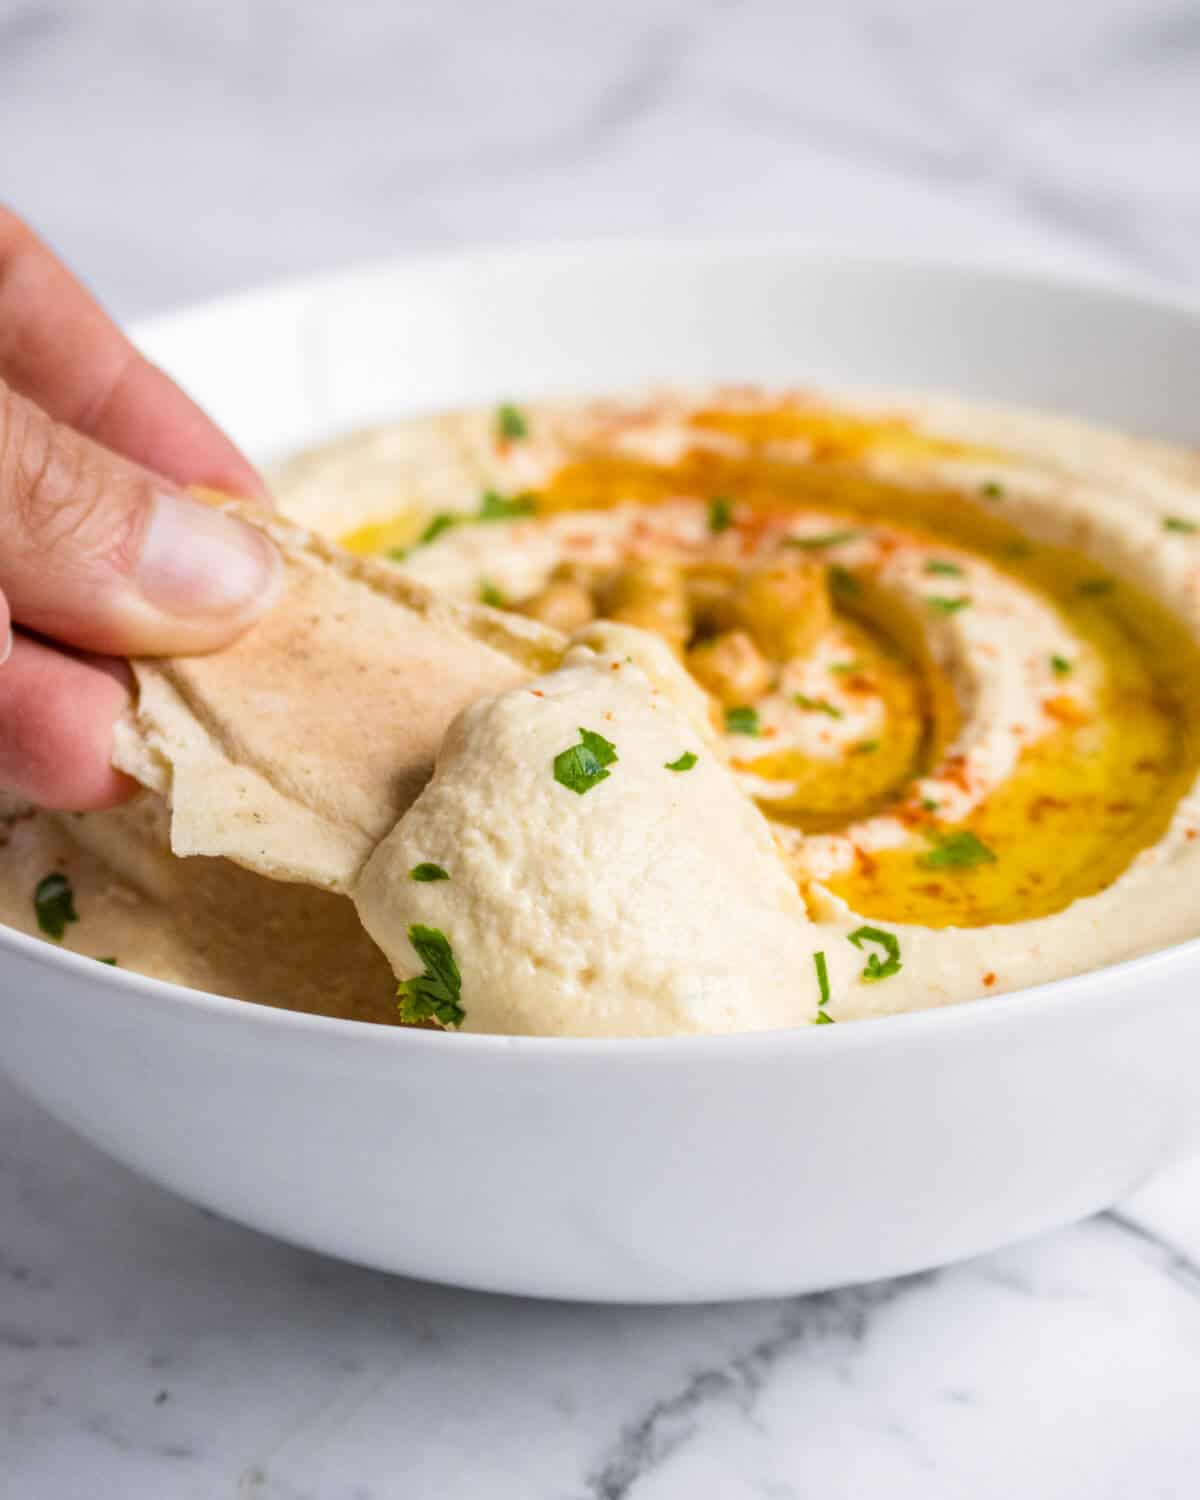 Hummus being dipped with a pita chip